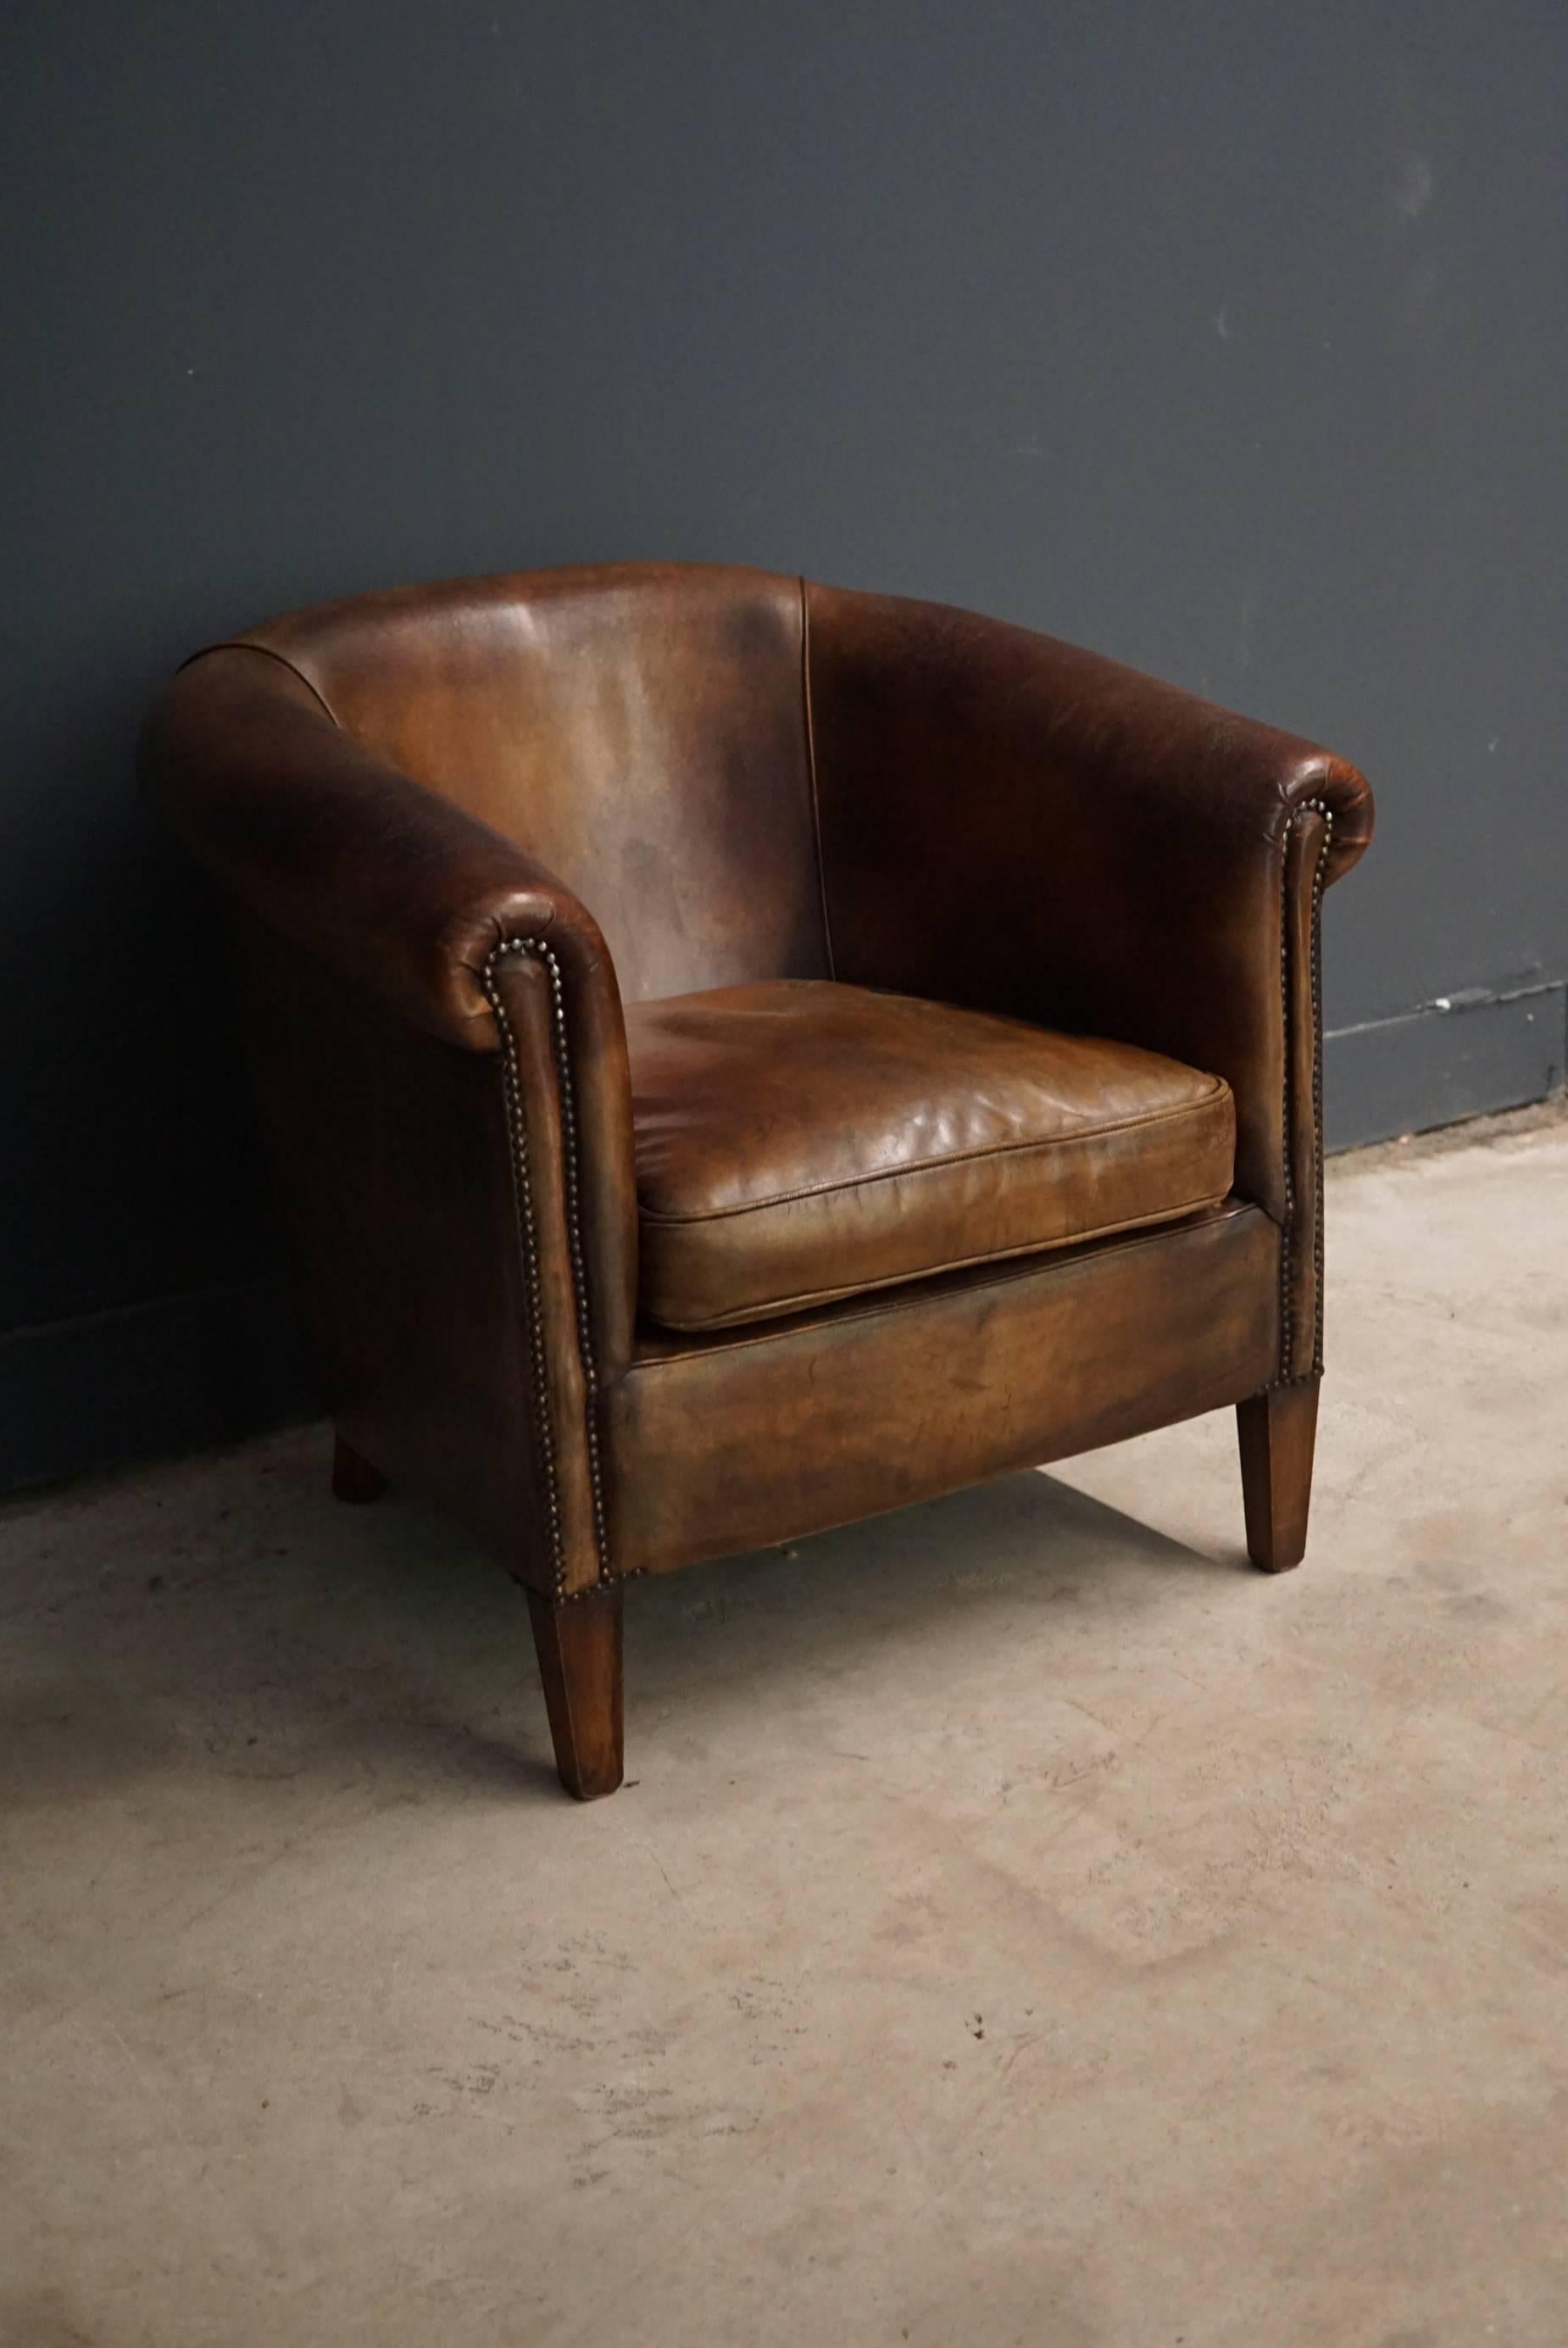 This club chair was designed and produced during the second half of the 20th century. The chair is made from cognac leather held together with metal pins and mounted on wooden legs. The lounge chair is in a vintage well used condition.